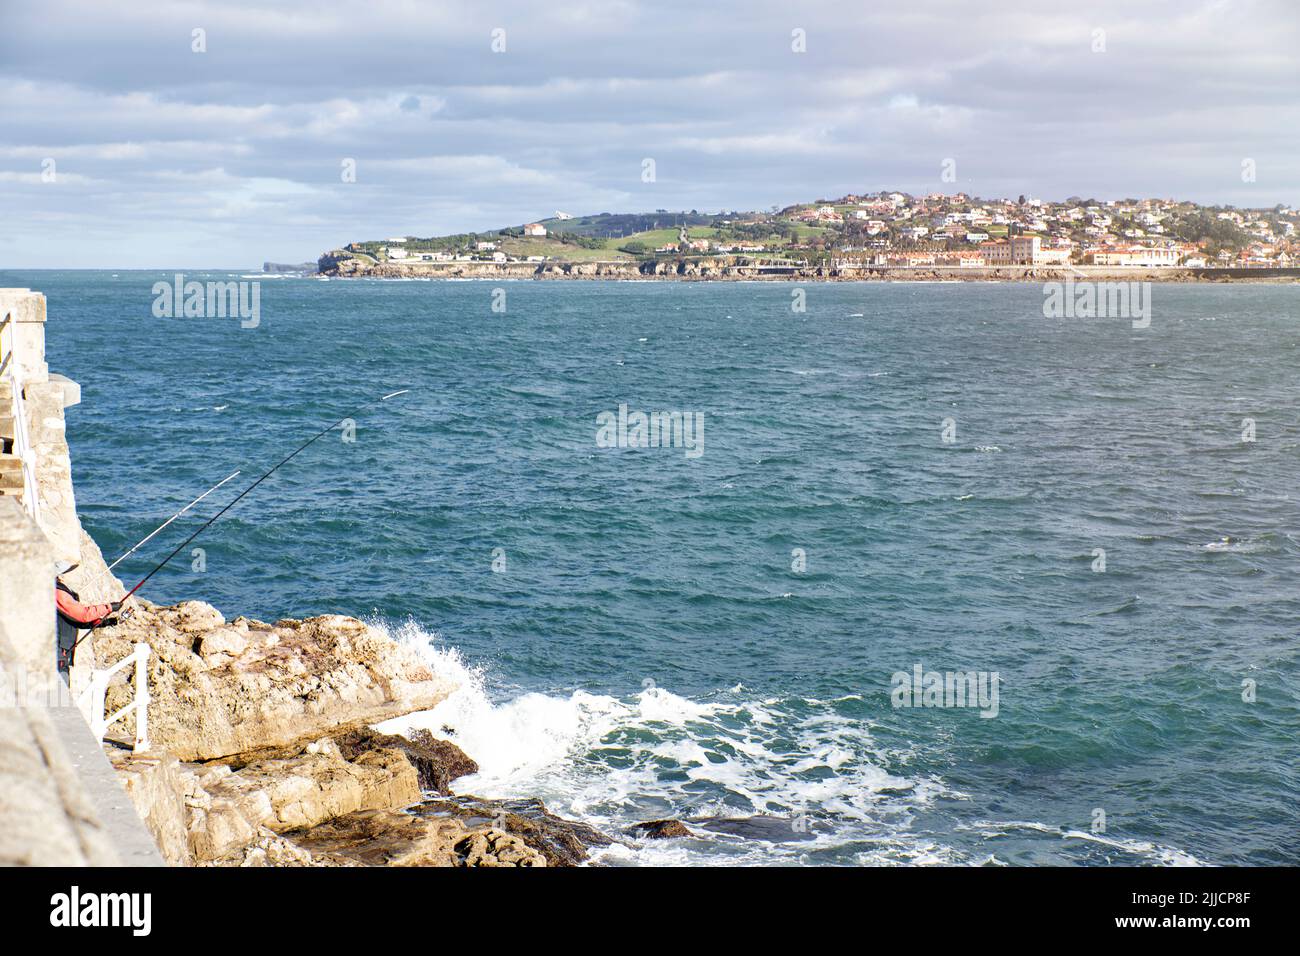 Person angling in a rocky area overlooking a coastal town. Concept travel, vacation Stock Photo